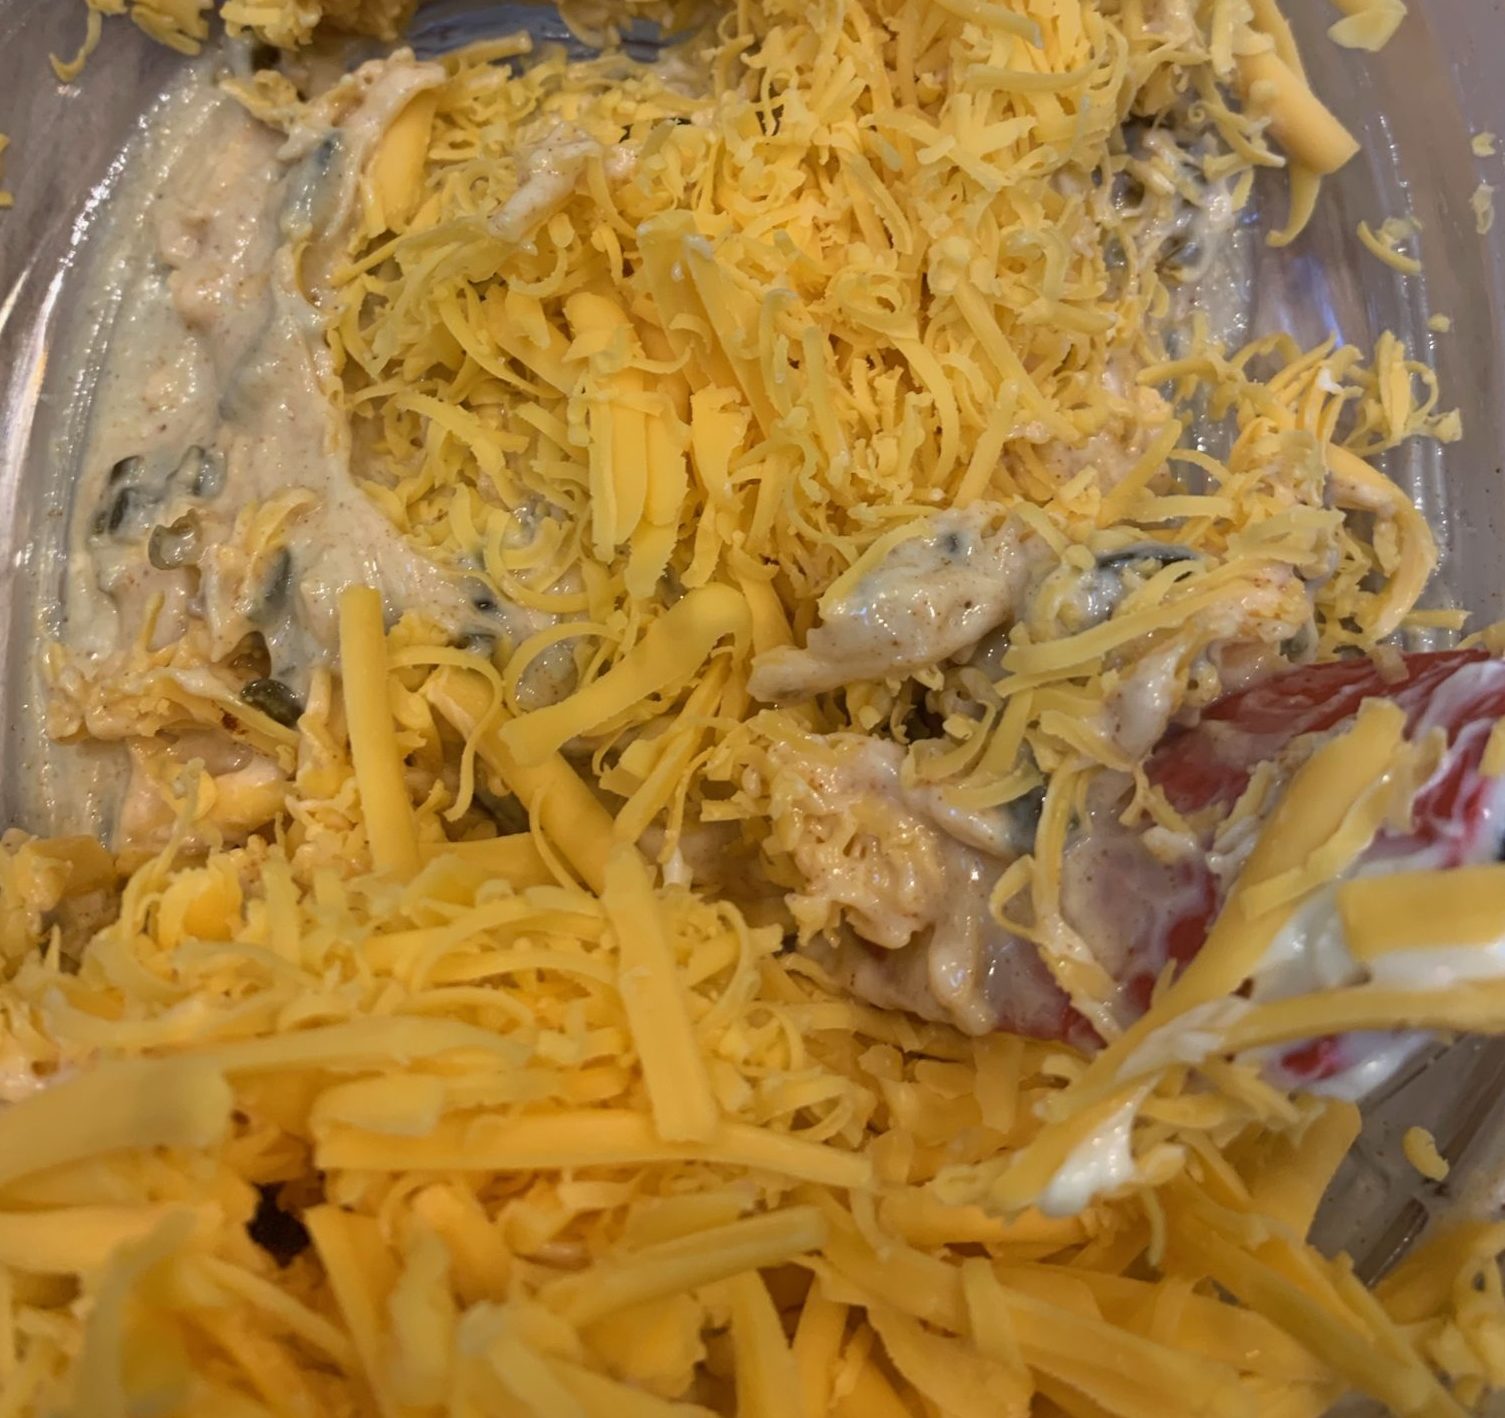 Showing two textures of grated cheese